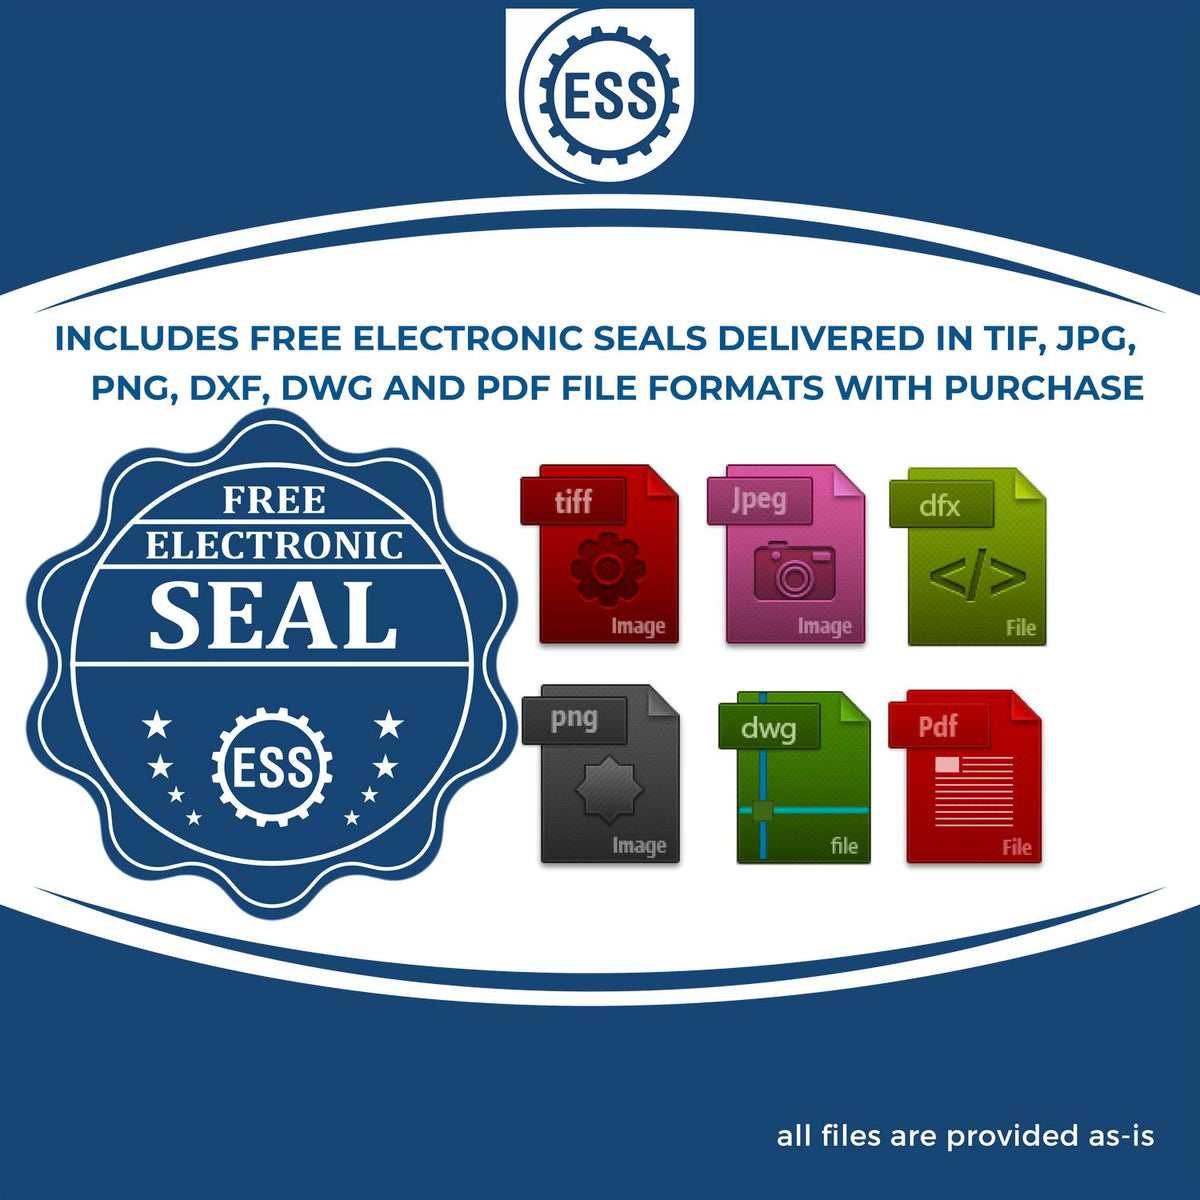 An infographic for the free electronic seal for the Soft Florida Professional Engineer Seal illustrating the different file type icons such as DXF, DWG, TIF, JPG and PNG.